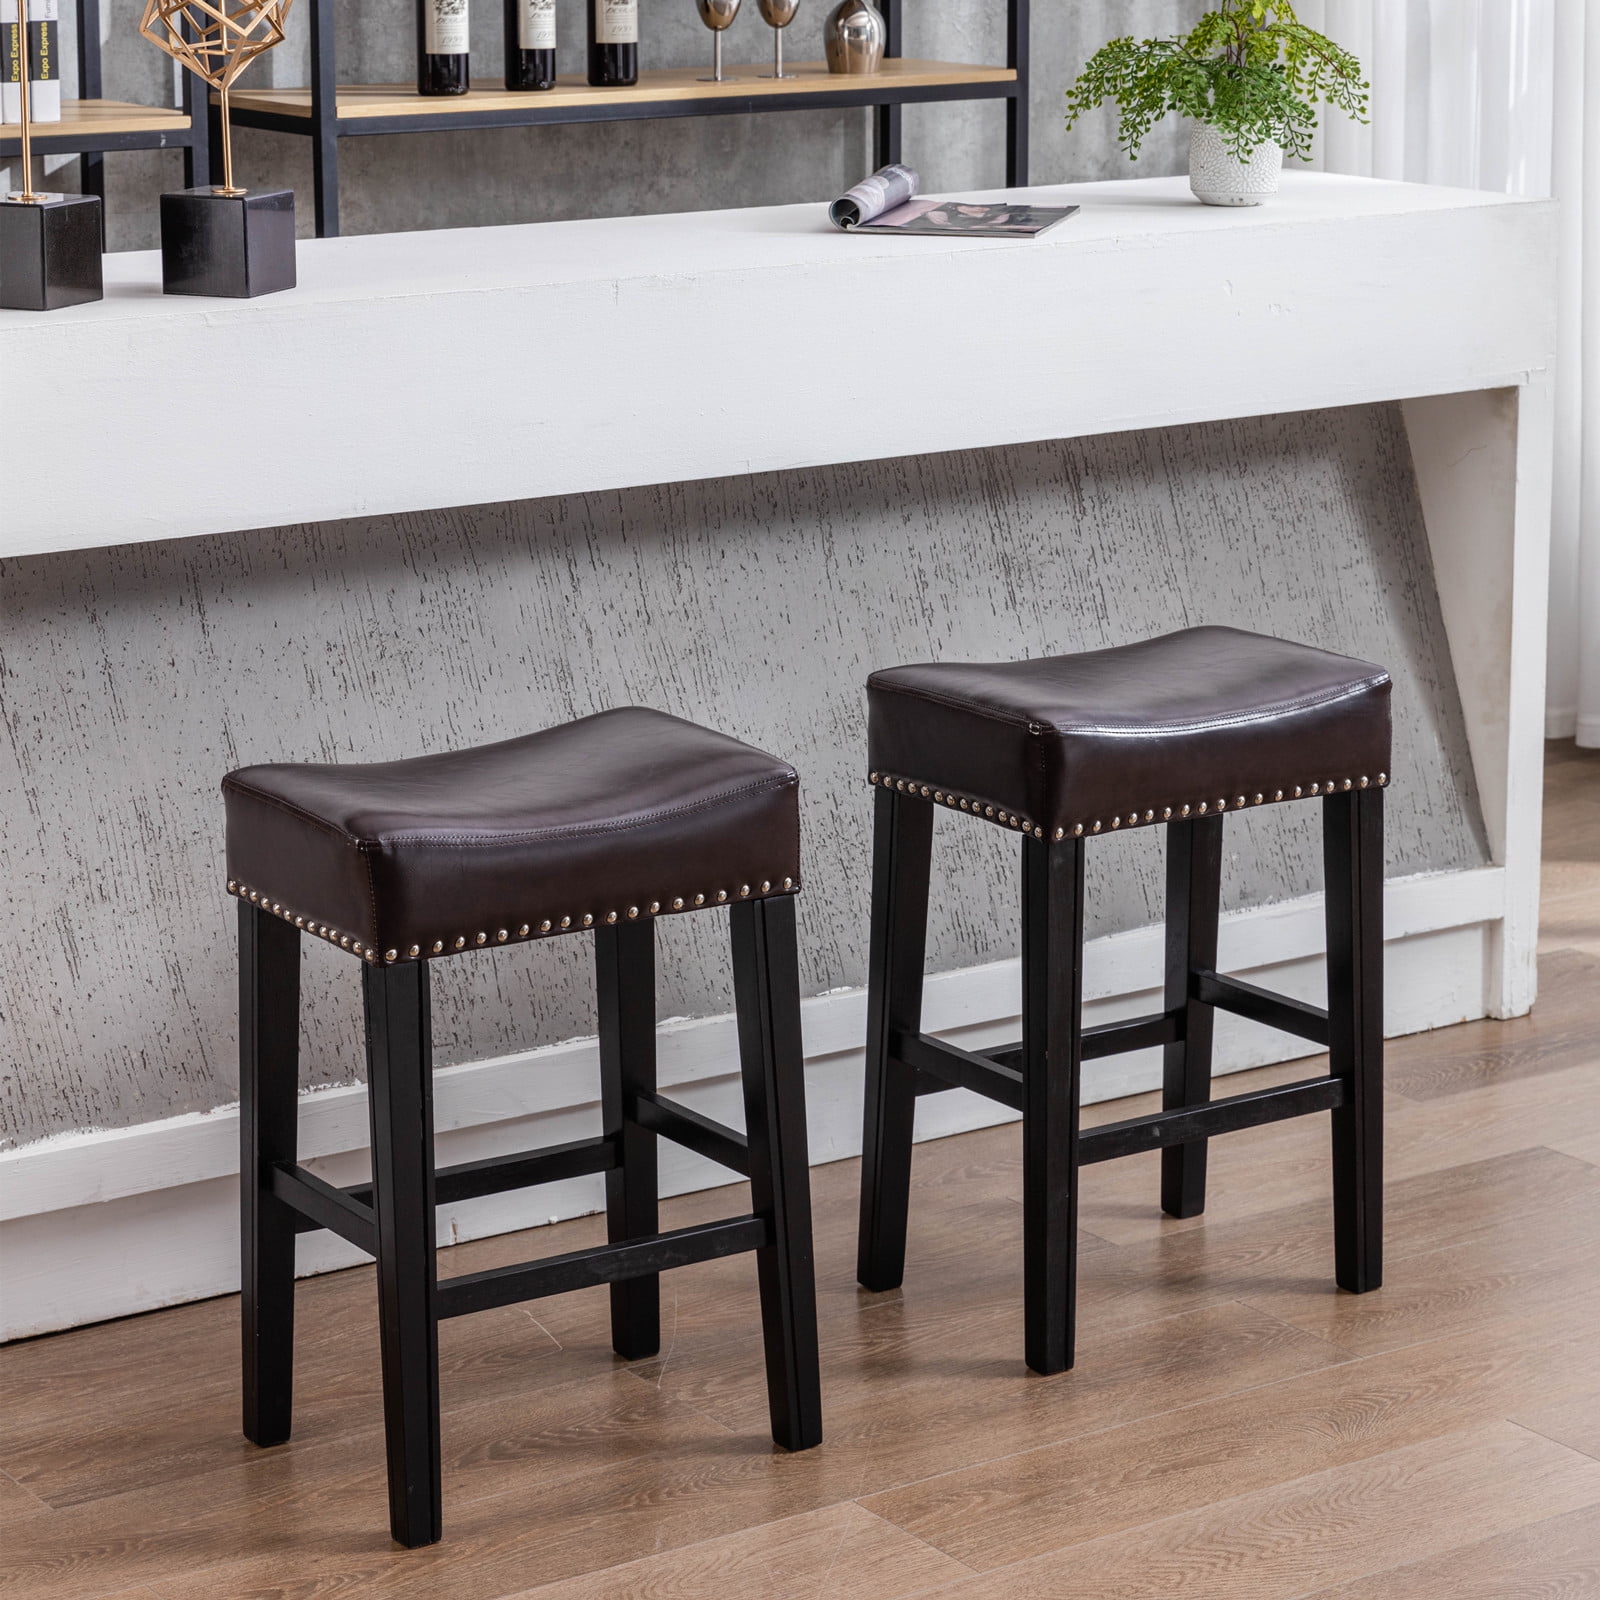 2 Pack Bar Stools Black Plastic Tops Wood Legs for Dining Bar 26" Seat Height 